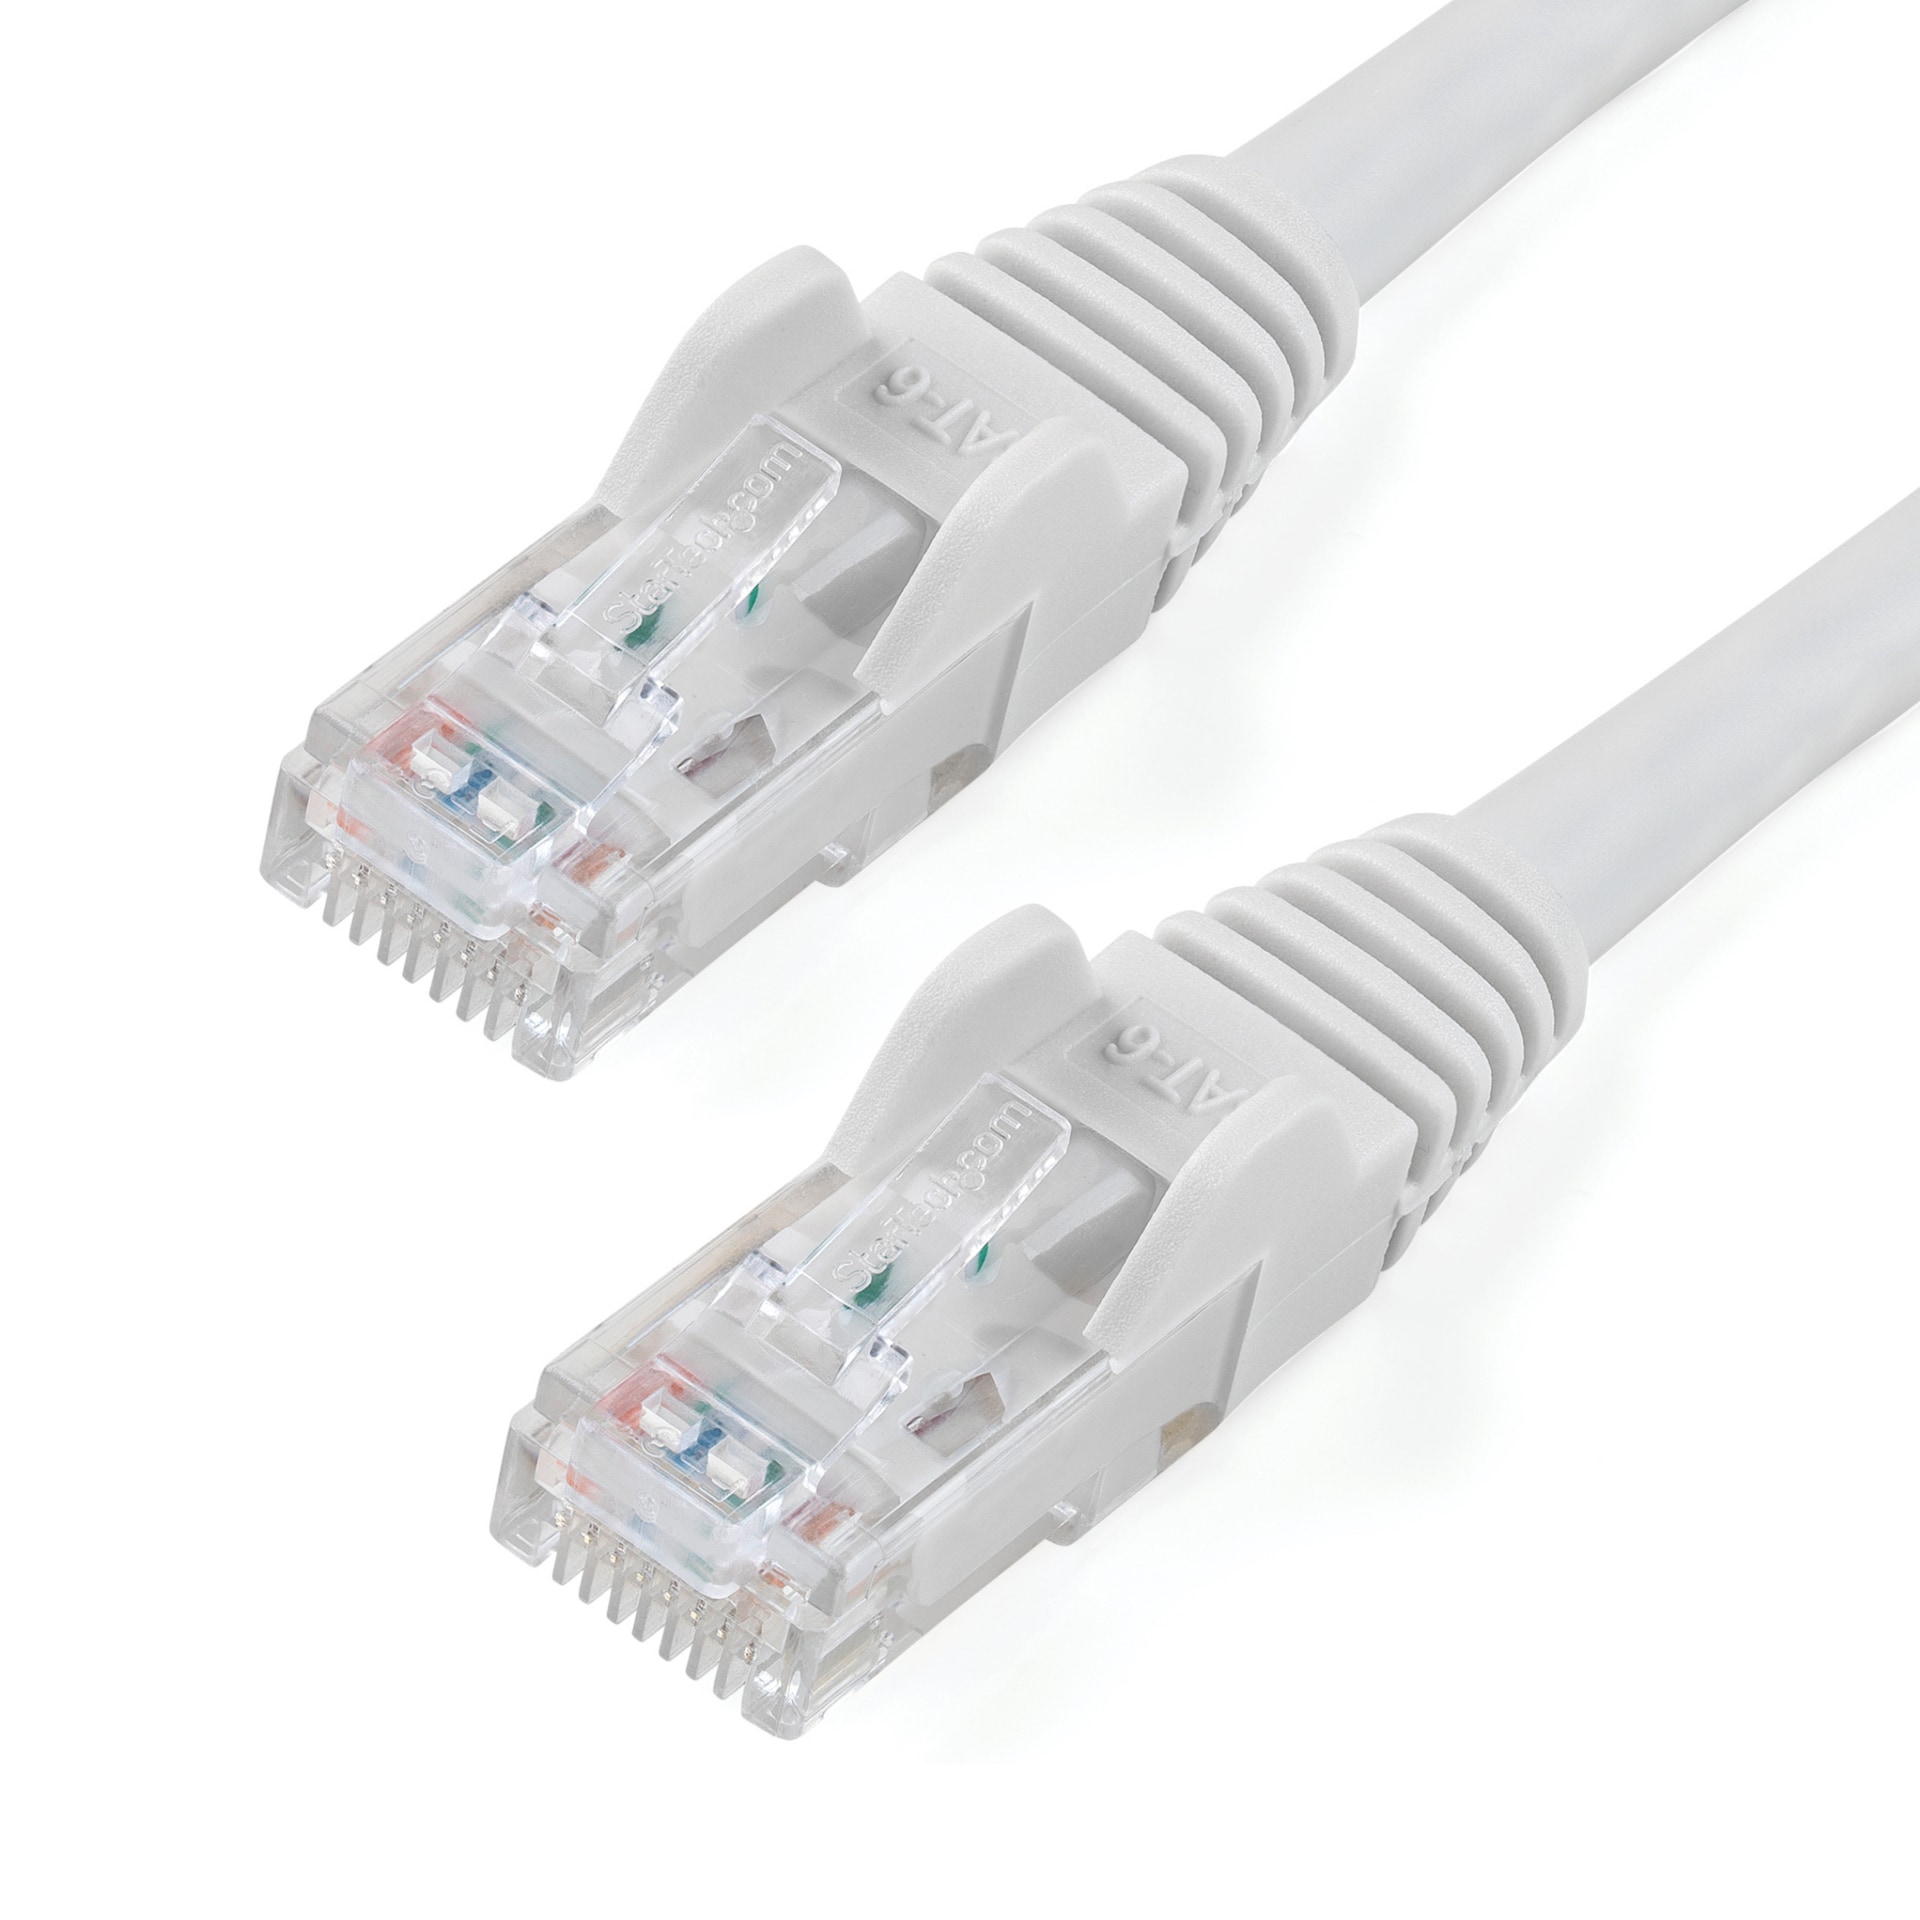 StarTech.com 2ft CAT6 Ethernet Cable White Snagless UTP CAT 6 Gigabit Cord/Wire 100W PoE 650MHz